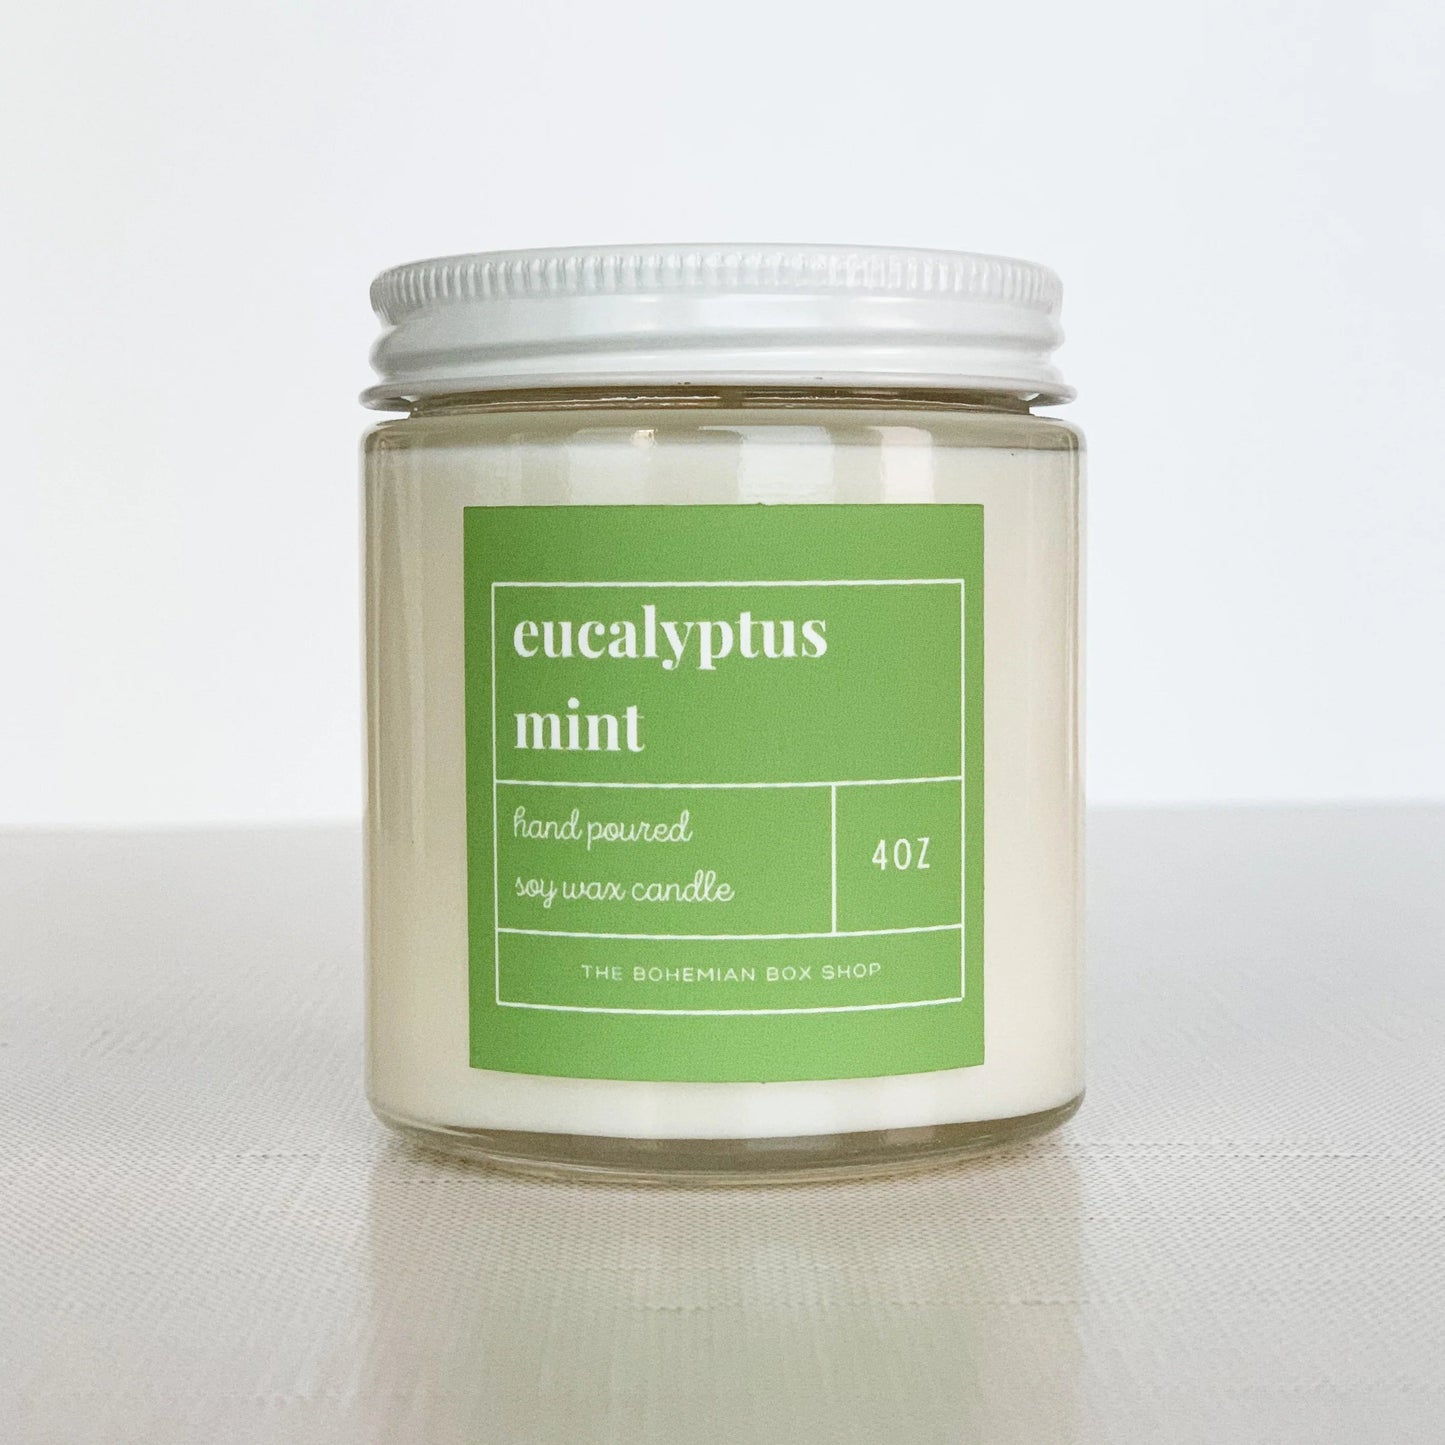 4 ounce eucalyptus mint soy candle with green label, clear jar, and white lid